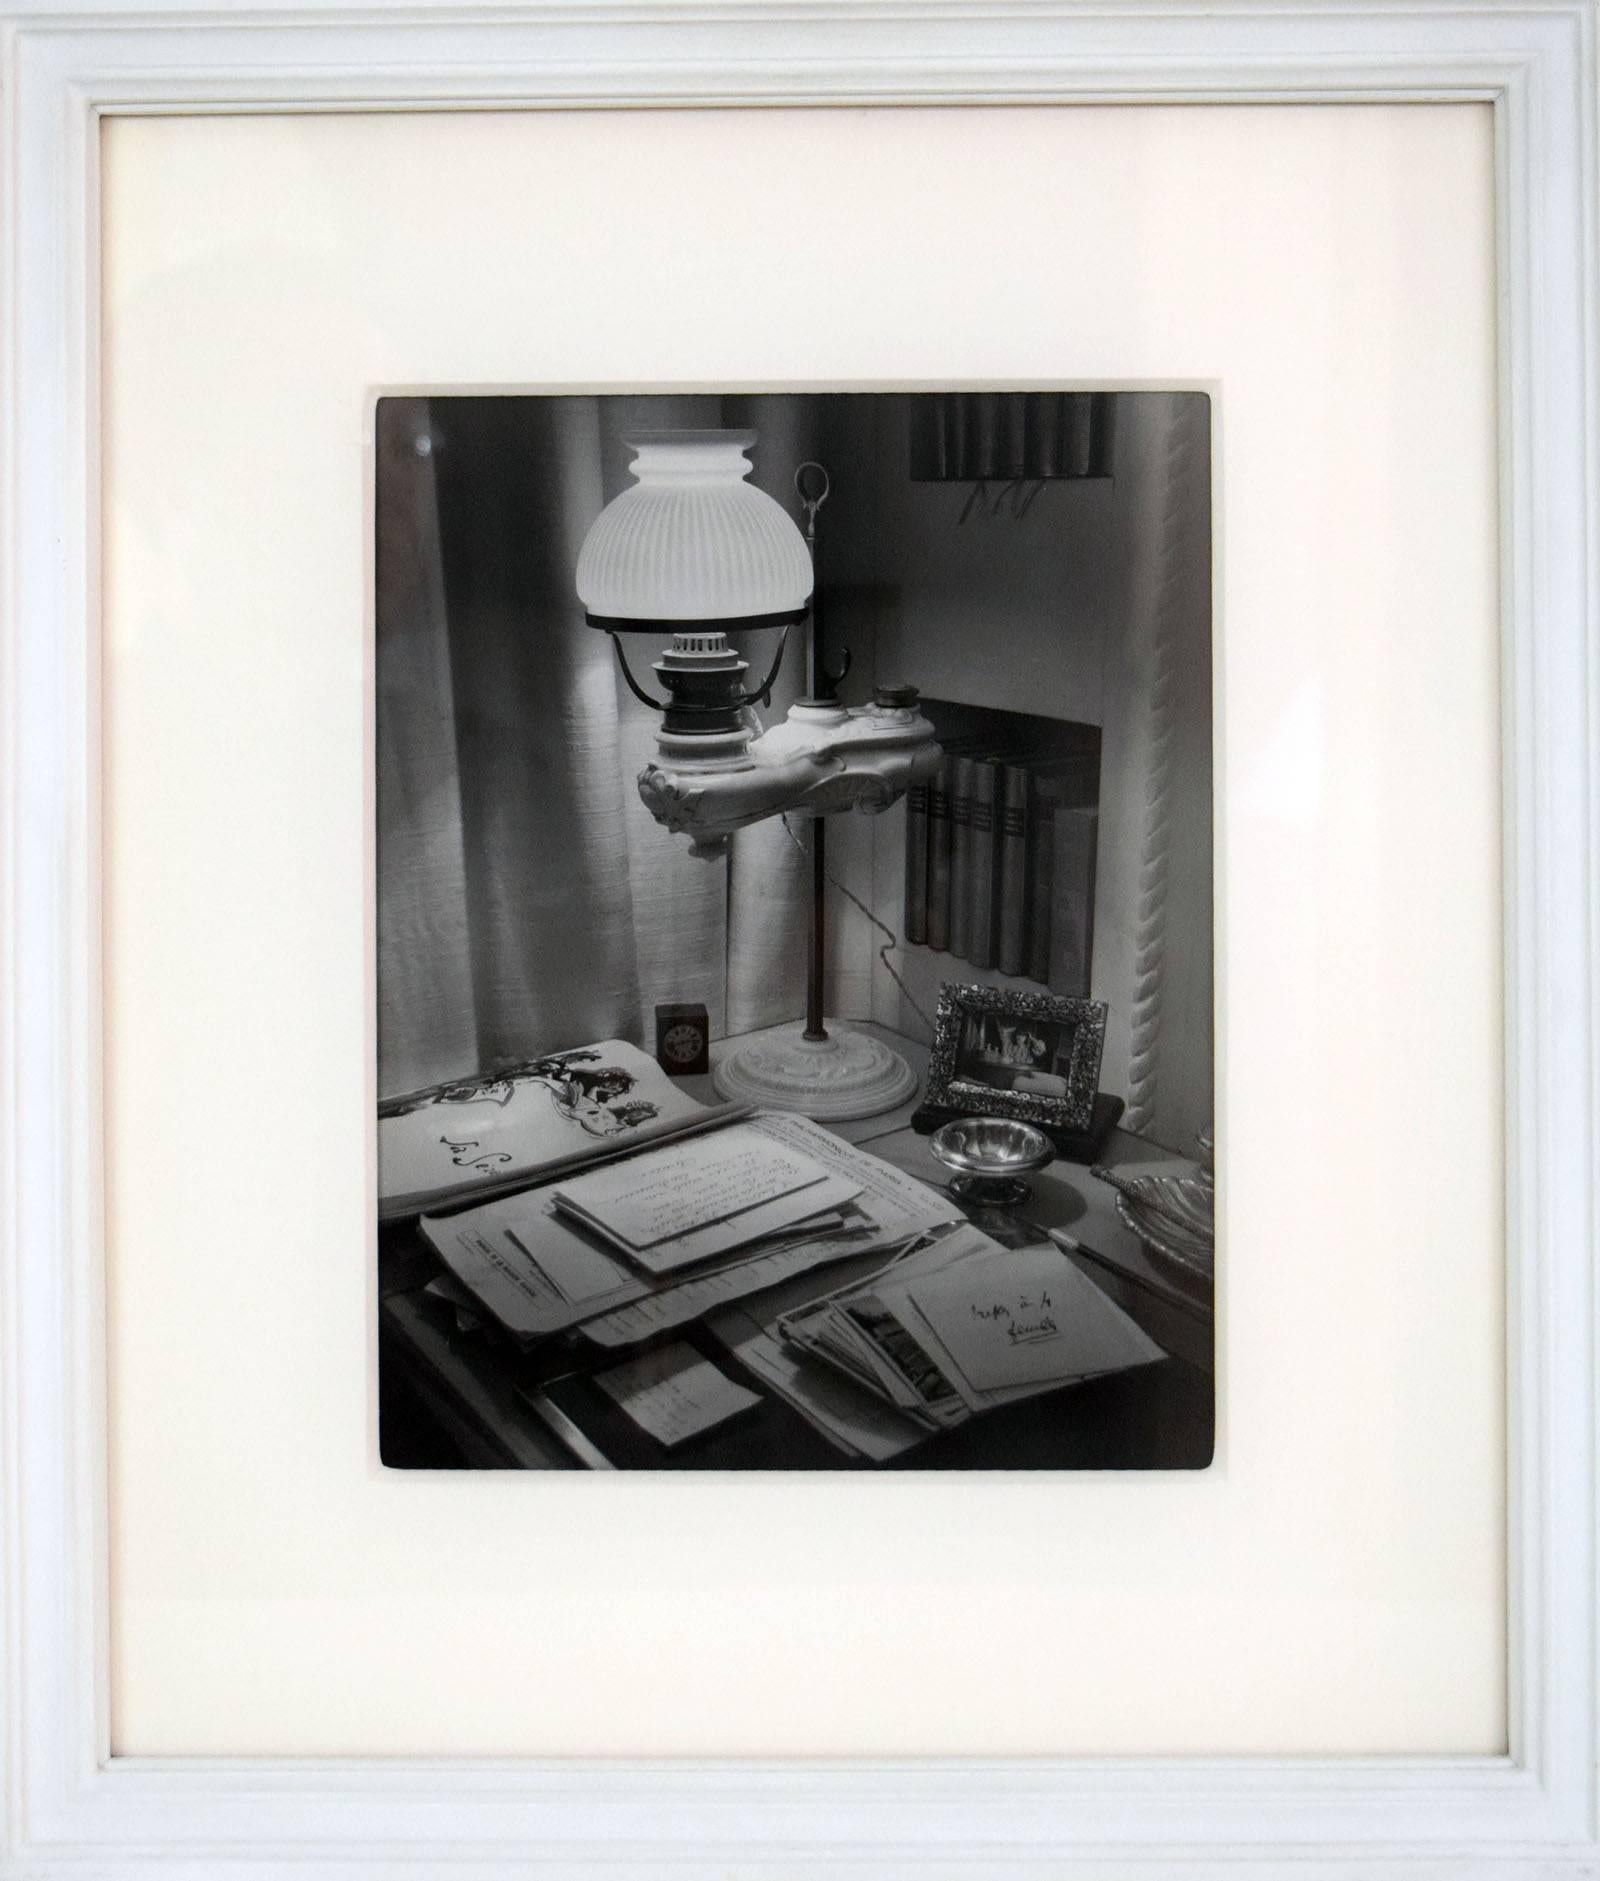 Marie-Blanche de Polignac, wife of Count Jean de Polignac, was the only child of the great couturiere Jeanne Lanvin, and a talented musician in her own right. This photograph shows her desk heaped with correspondence, an antique white porcelain